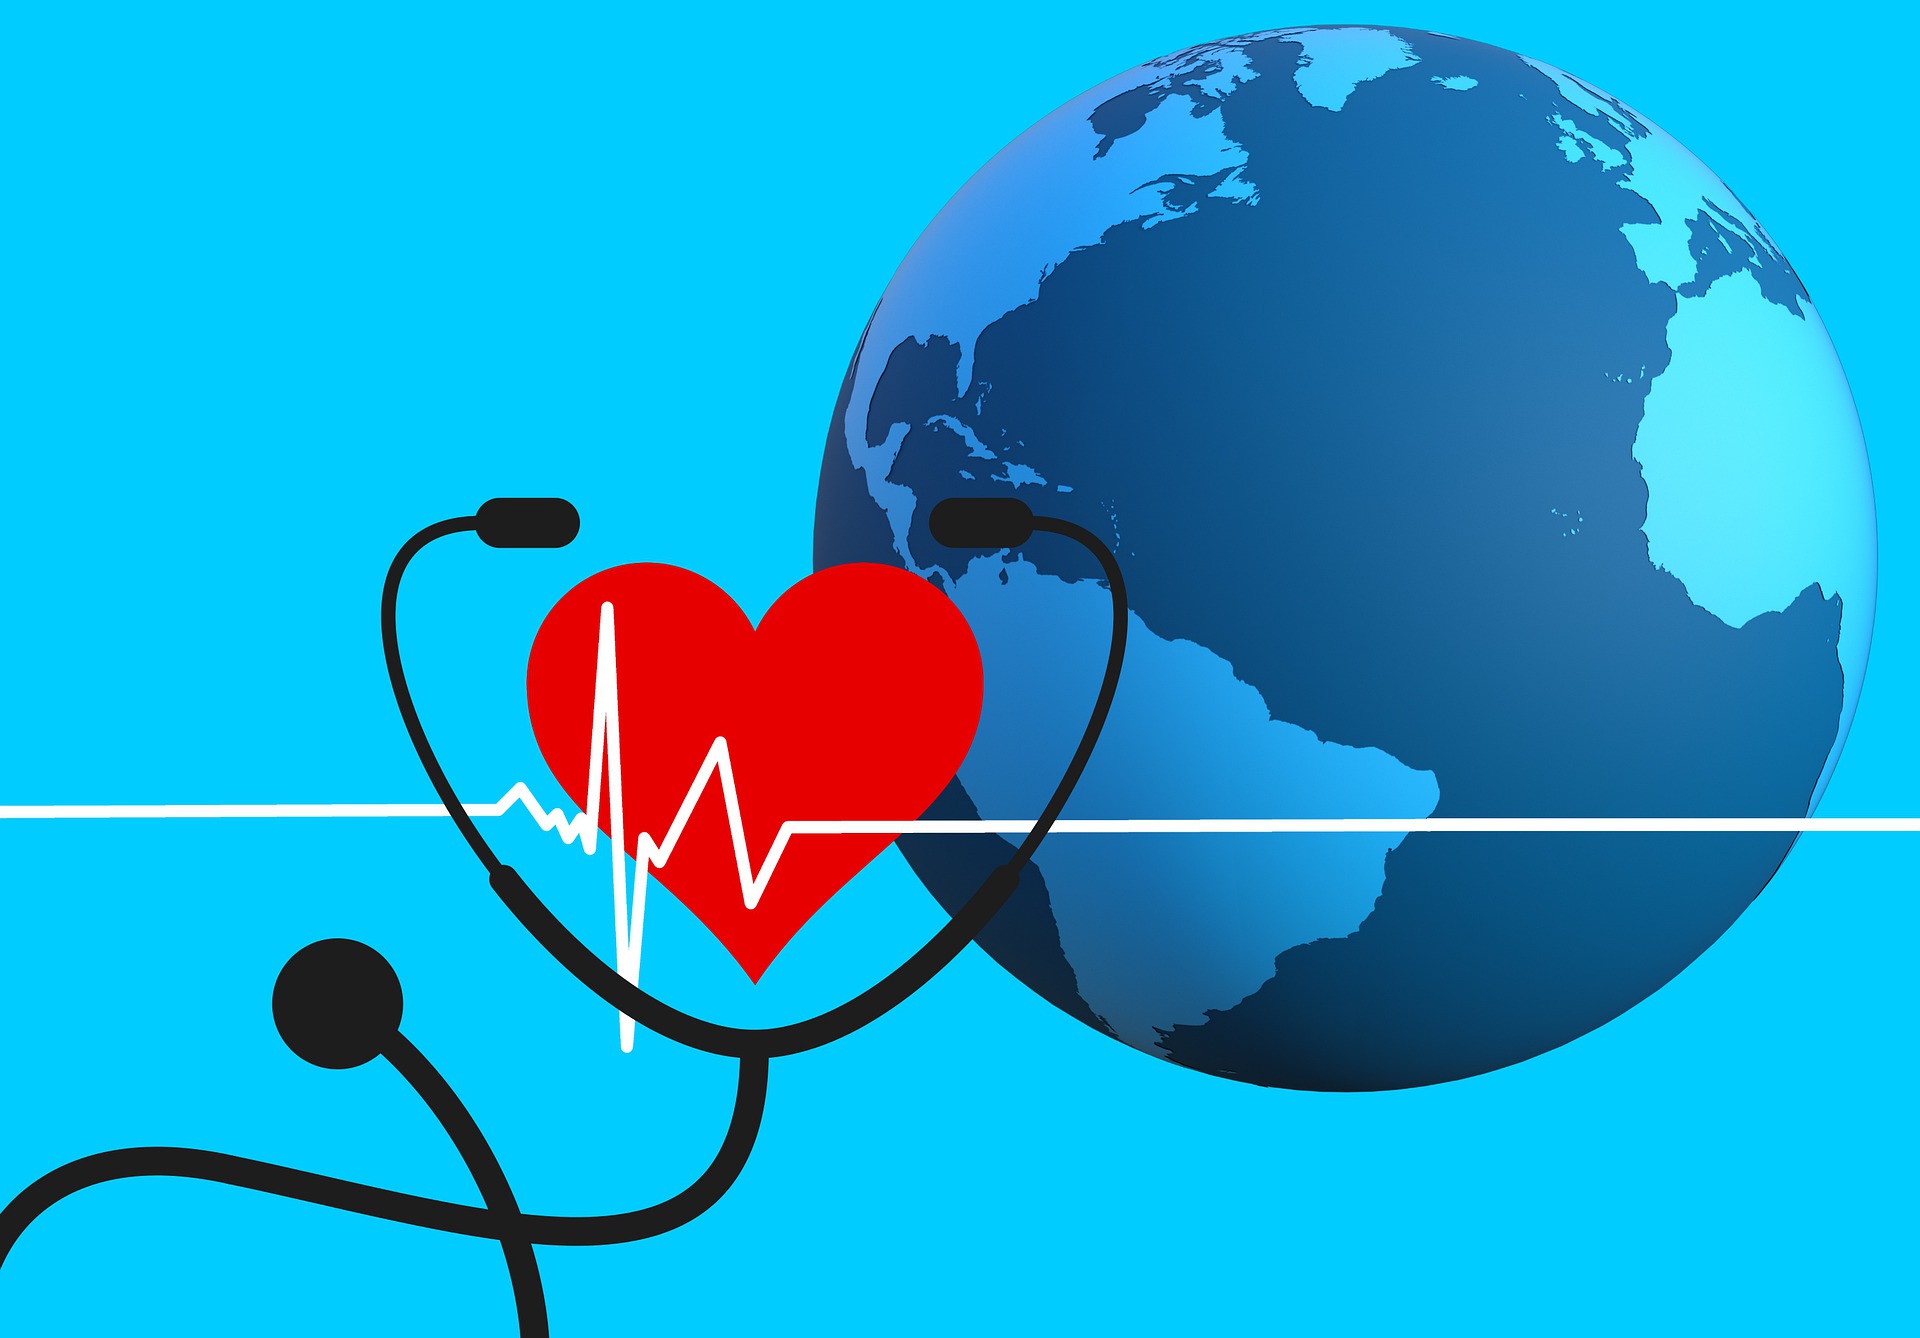 Graphic of Earth with a heart, stethoscope, and EKG wave; graphic by Tumisu, via Pixabay.com.